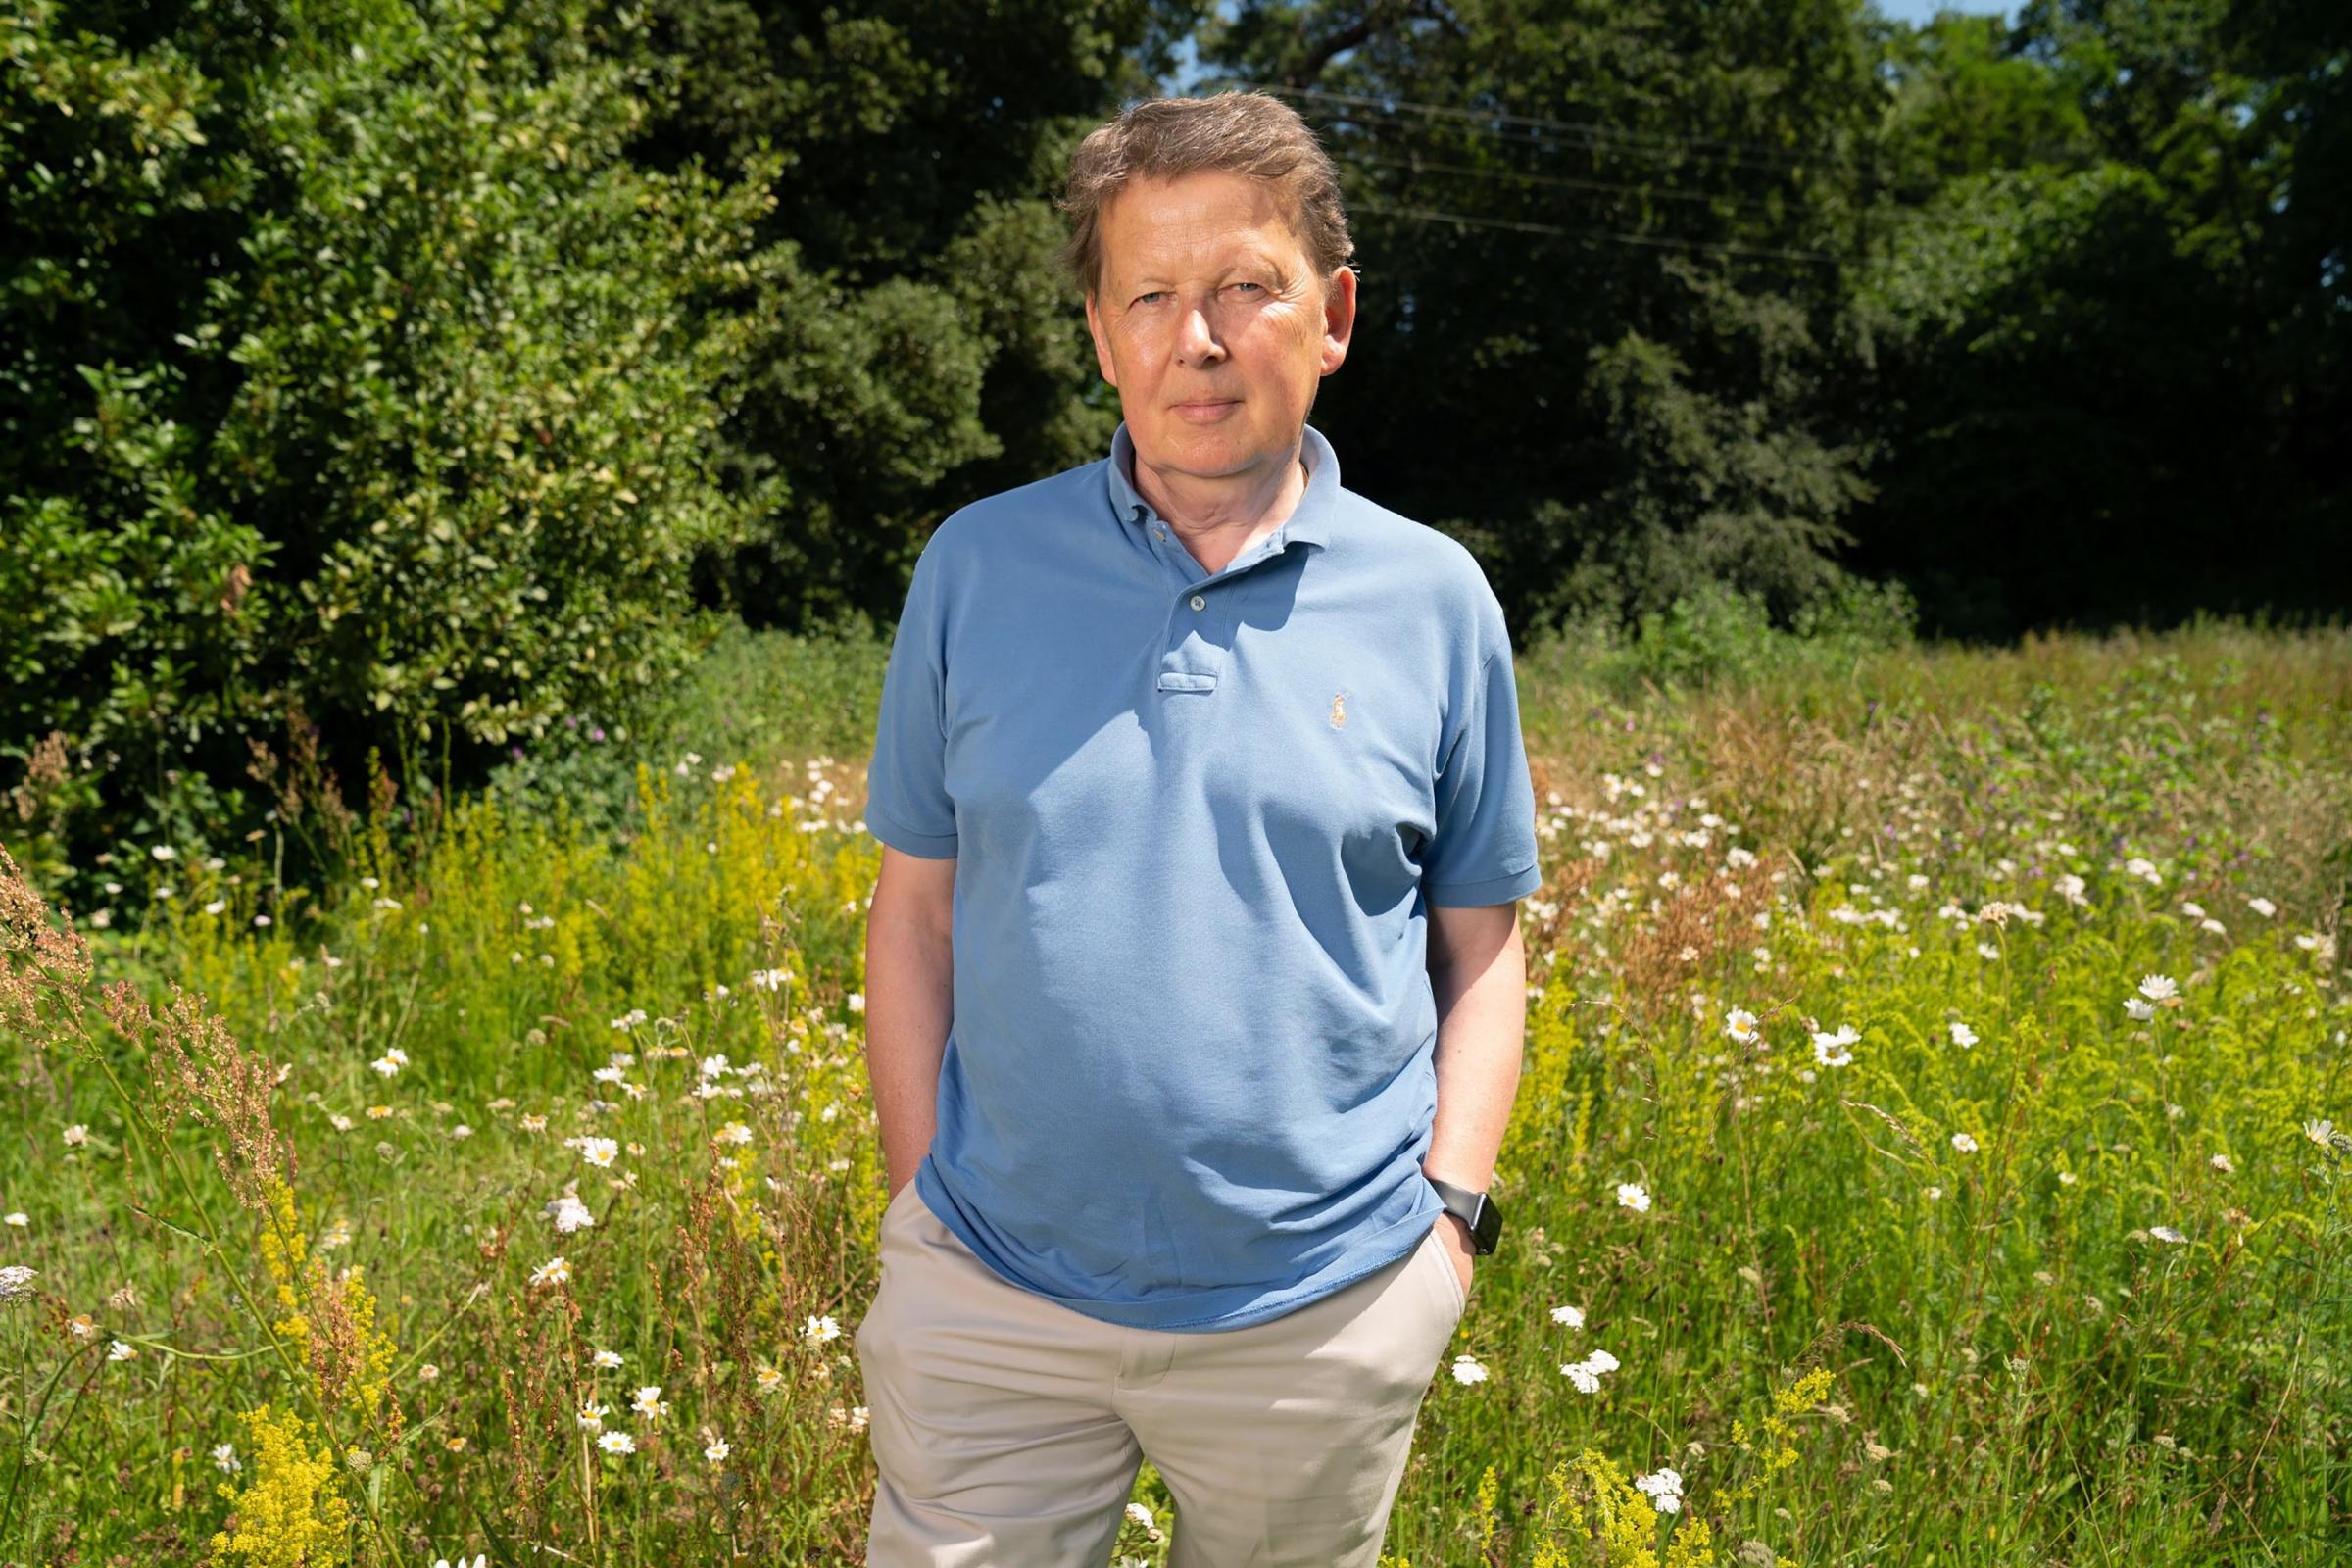 Bill Turnbull urges cannabis law changes after smoking drug for documentary